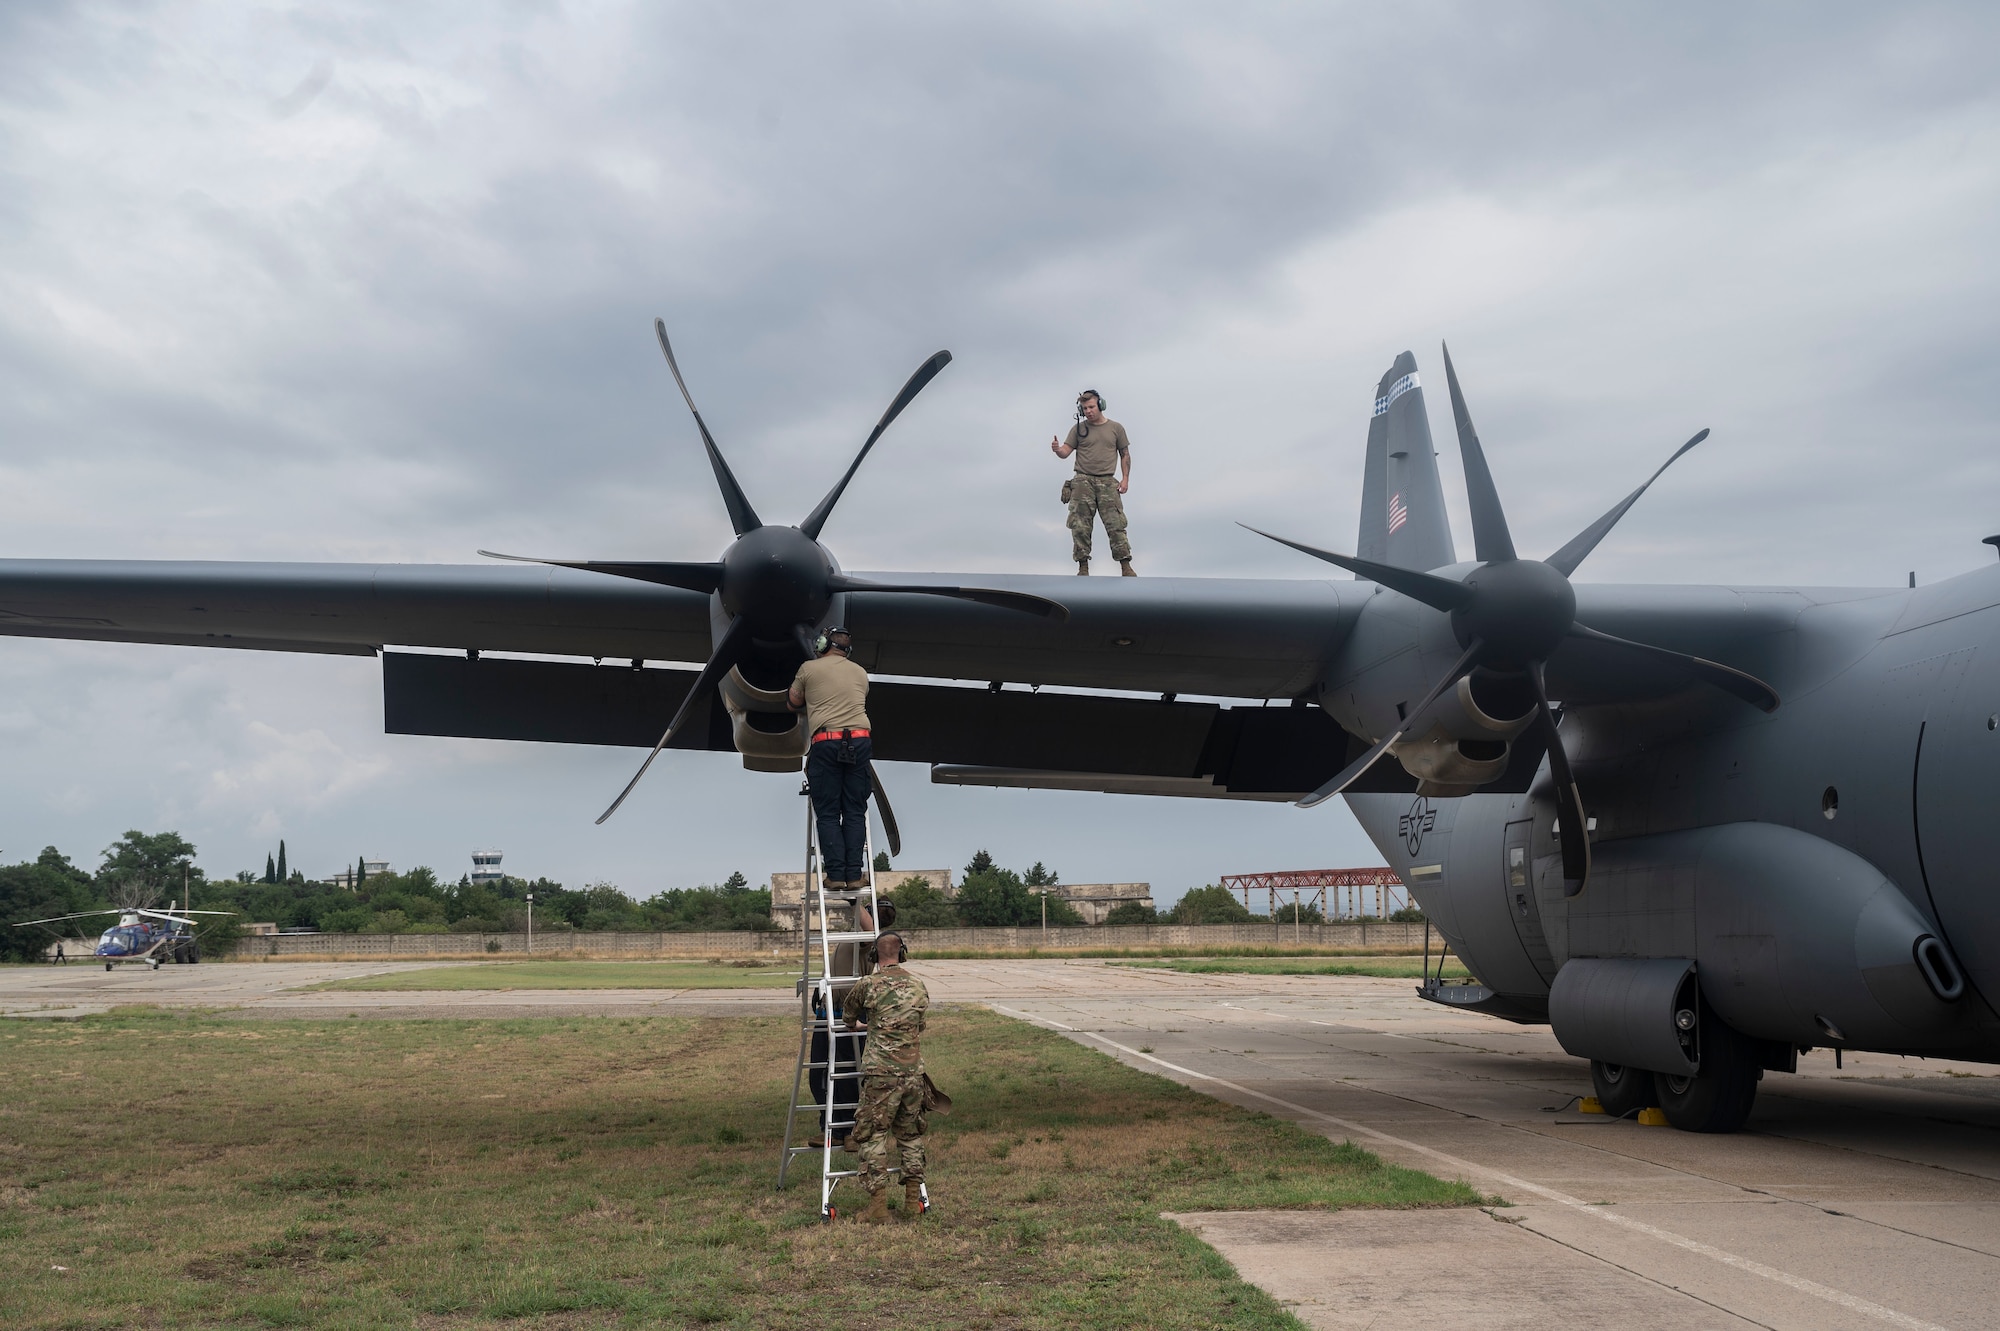 U.S. Air Force Airmen assigned to the 86th Aircraft Maintenance Squadron inspect a C-130J Super Hercules aircraft after a flight through Georgian airspace during exercise Agile Spirit 21